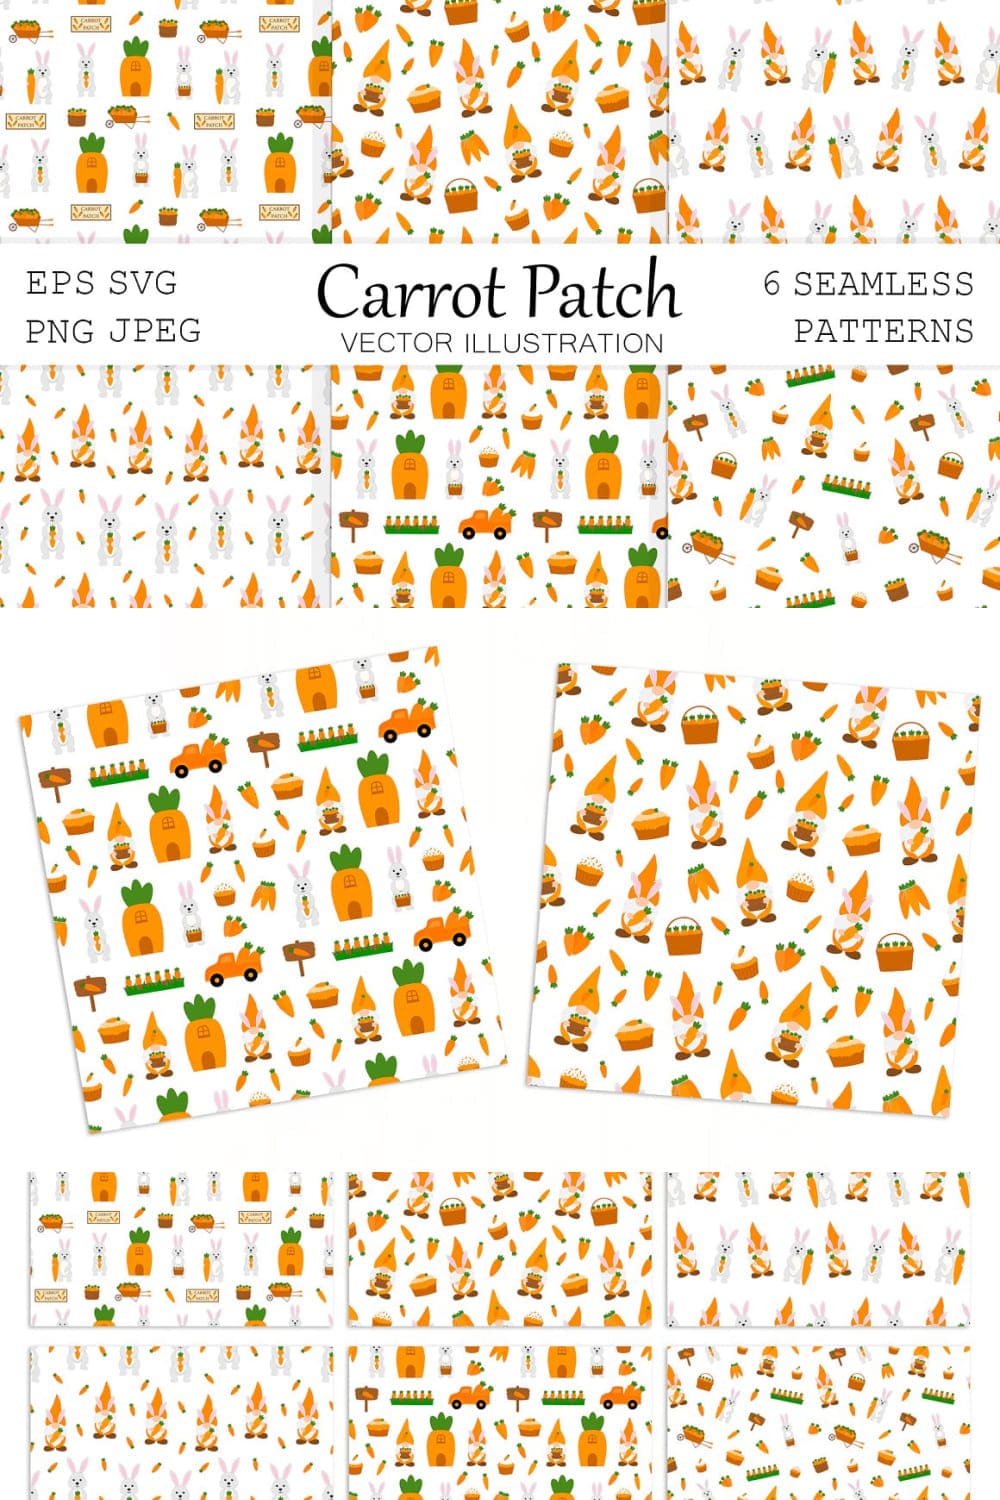 Gnomes Carrot pattern. Bunny pattern - pinterest image preview.